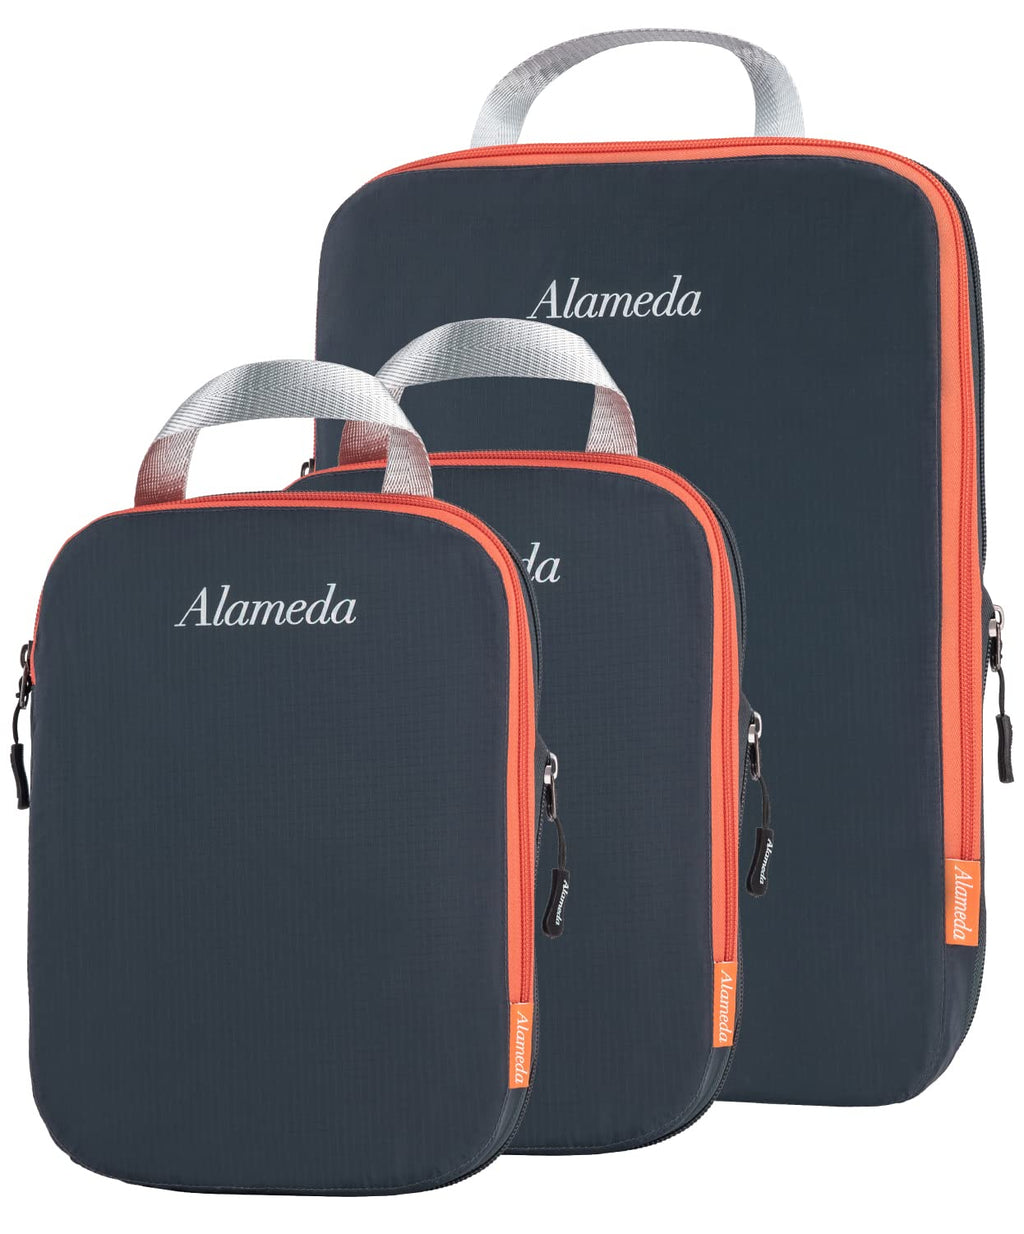 [Australia] - Alameda Compression Packing Cubes for Suitcases and Backpack,luggage Travel Organiser Packing Bags Set(Dark Grey) Dark Grey 